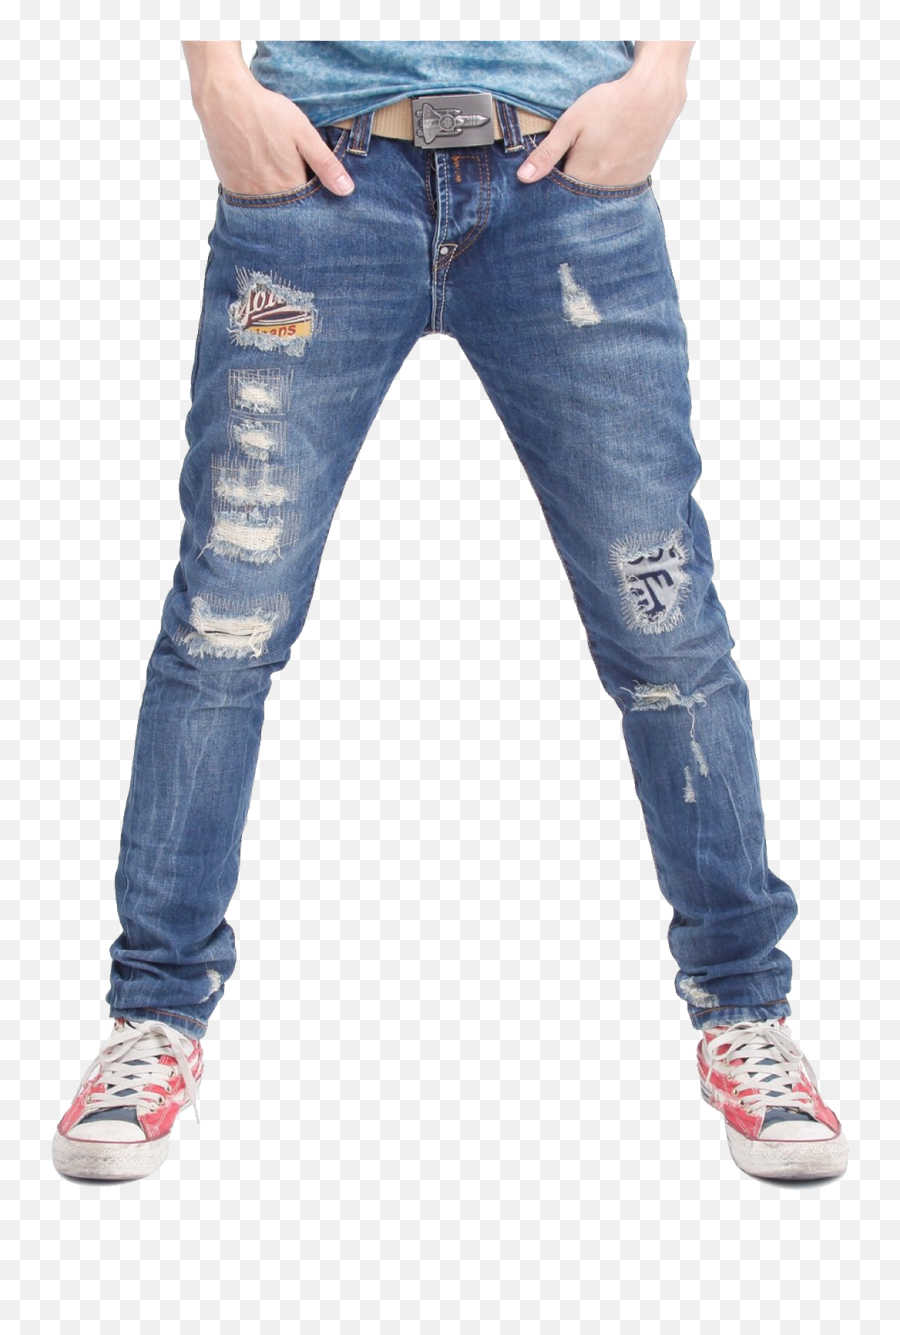 Pocket Clipart Clothes Pocket Clothes - 1980s Ripped Jeans For Men Emoji,Male Emoji Pants